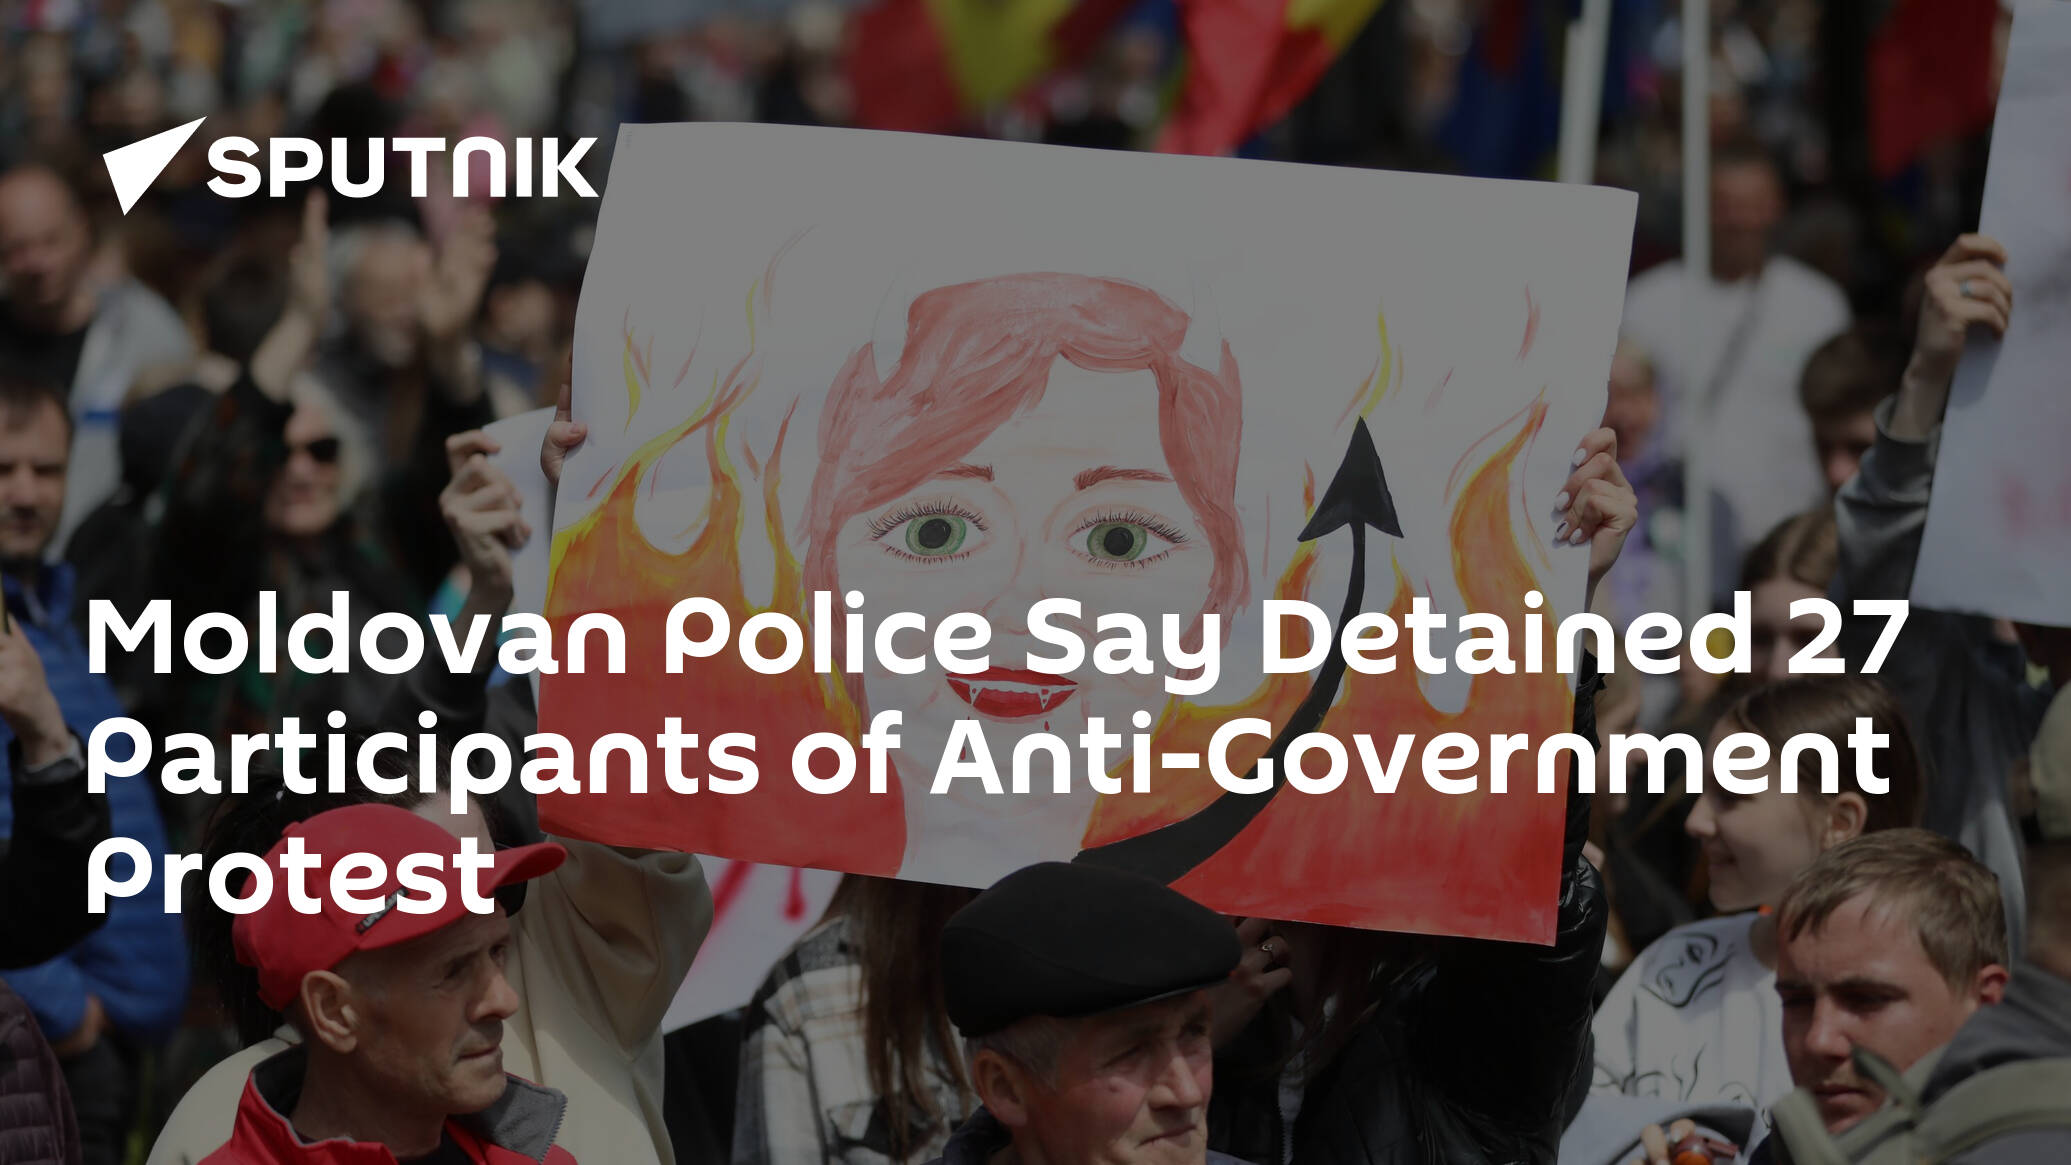 Moldovan Police Say Detained 27 Participants of Anti-Government Protest